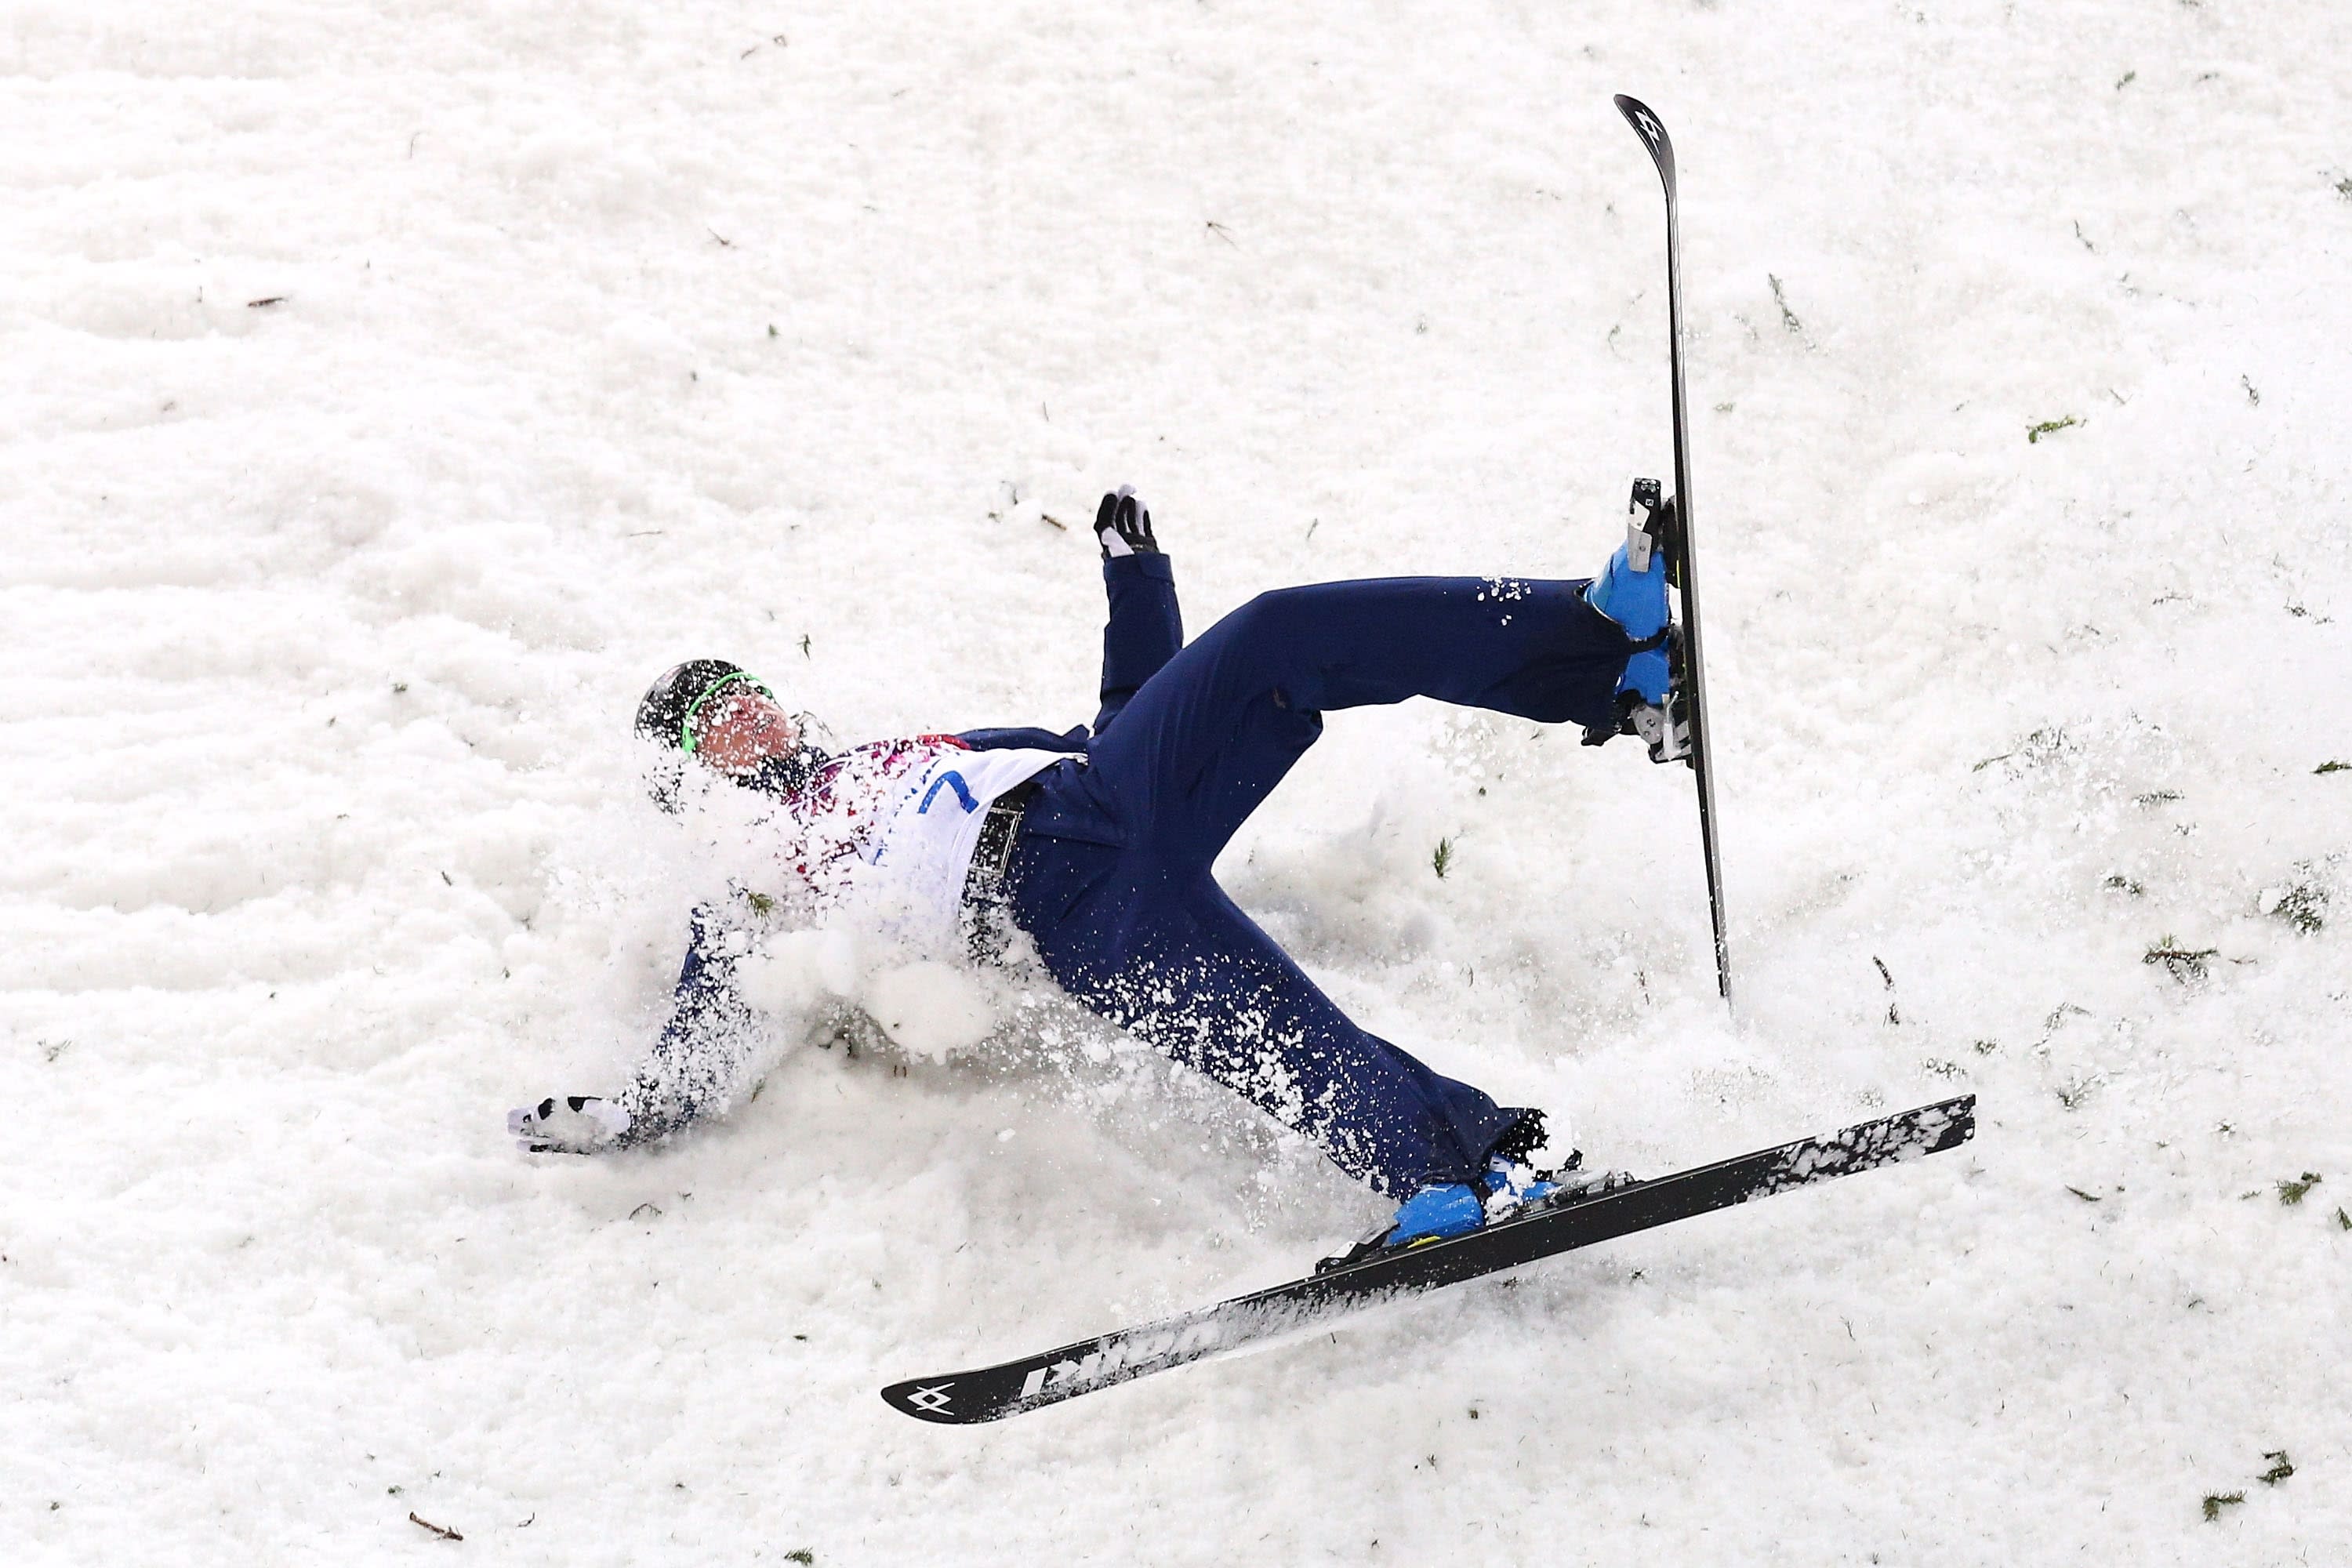 U.S. freestyle aerial skier Emily Cook crashes out of Olympics